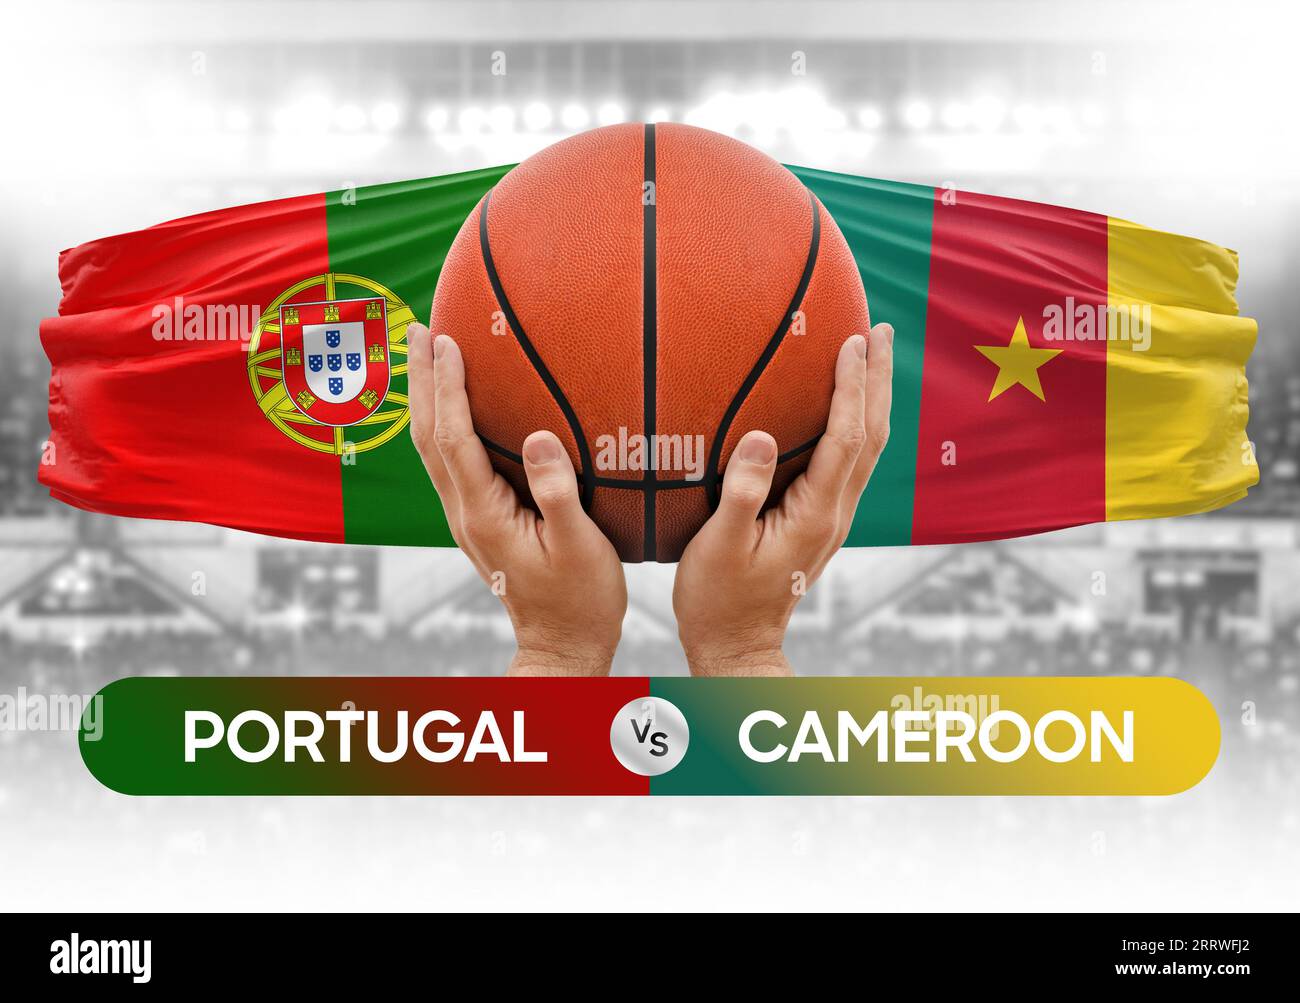 Portugal vs Cameroon national basketball teams basket ball match  competition cup concept image Stock Photo - Alamy